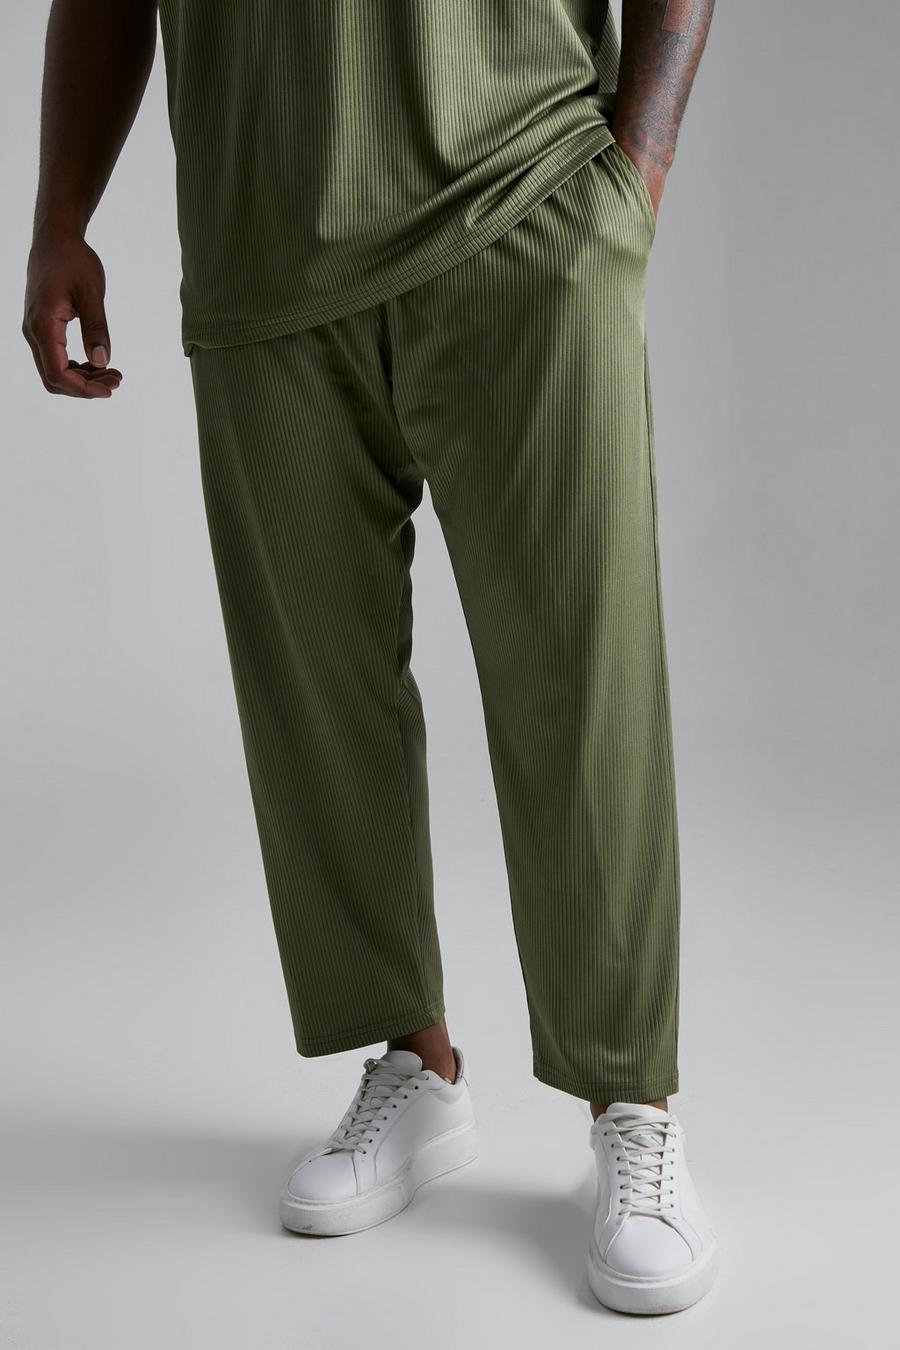 Olive vert Plus Tapered Fit Pleated Jogger